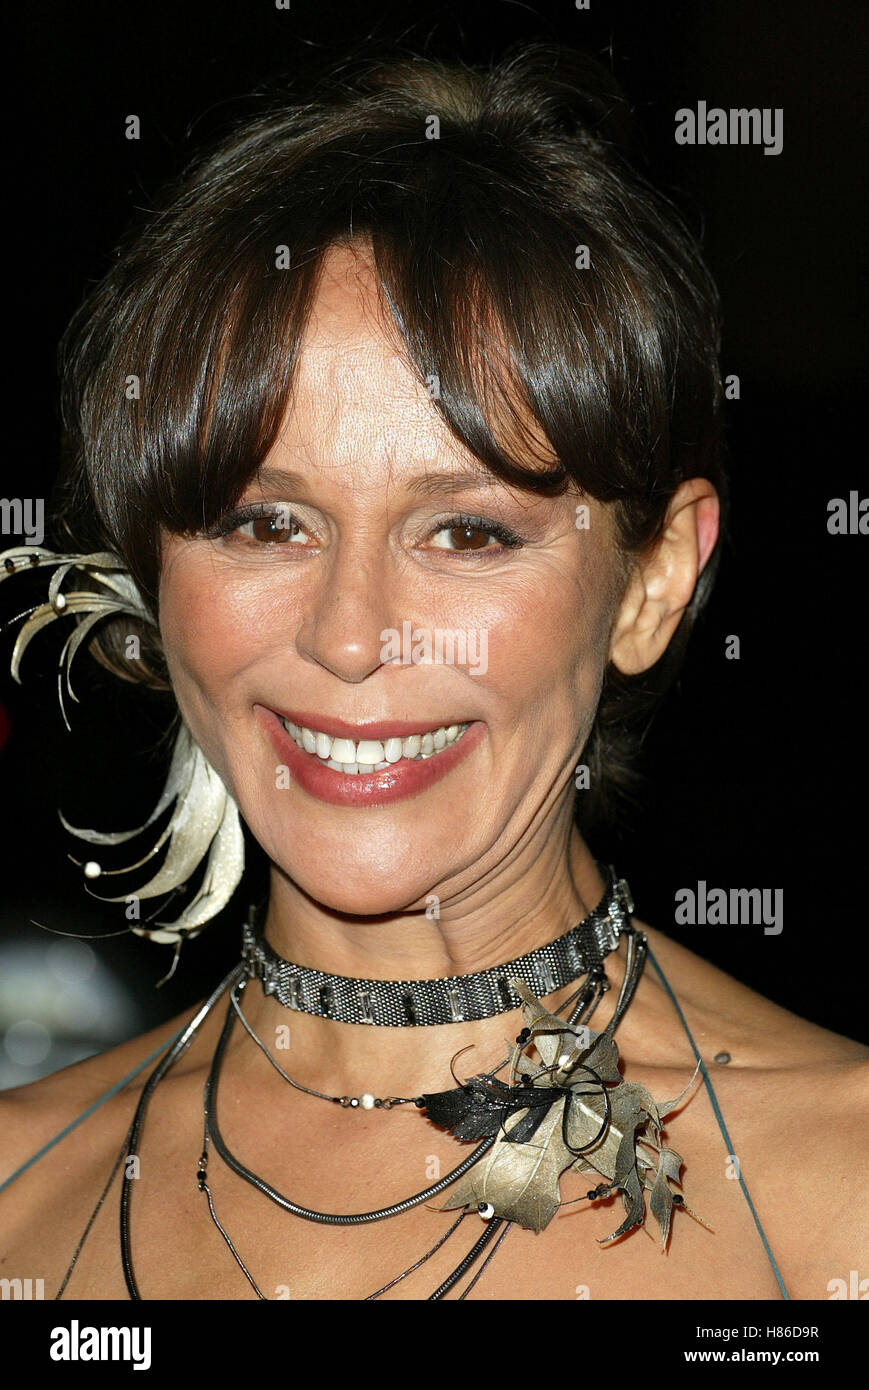 CHRISTINE BOISSON TRUTH ABOUT CHARLIE WORLD PREM ACADEMY OF MOTION PICTURE ARTS BEVERLY HILLS LOS ANGELES 16 October 2002 Stock Photo